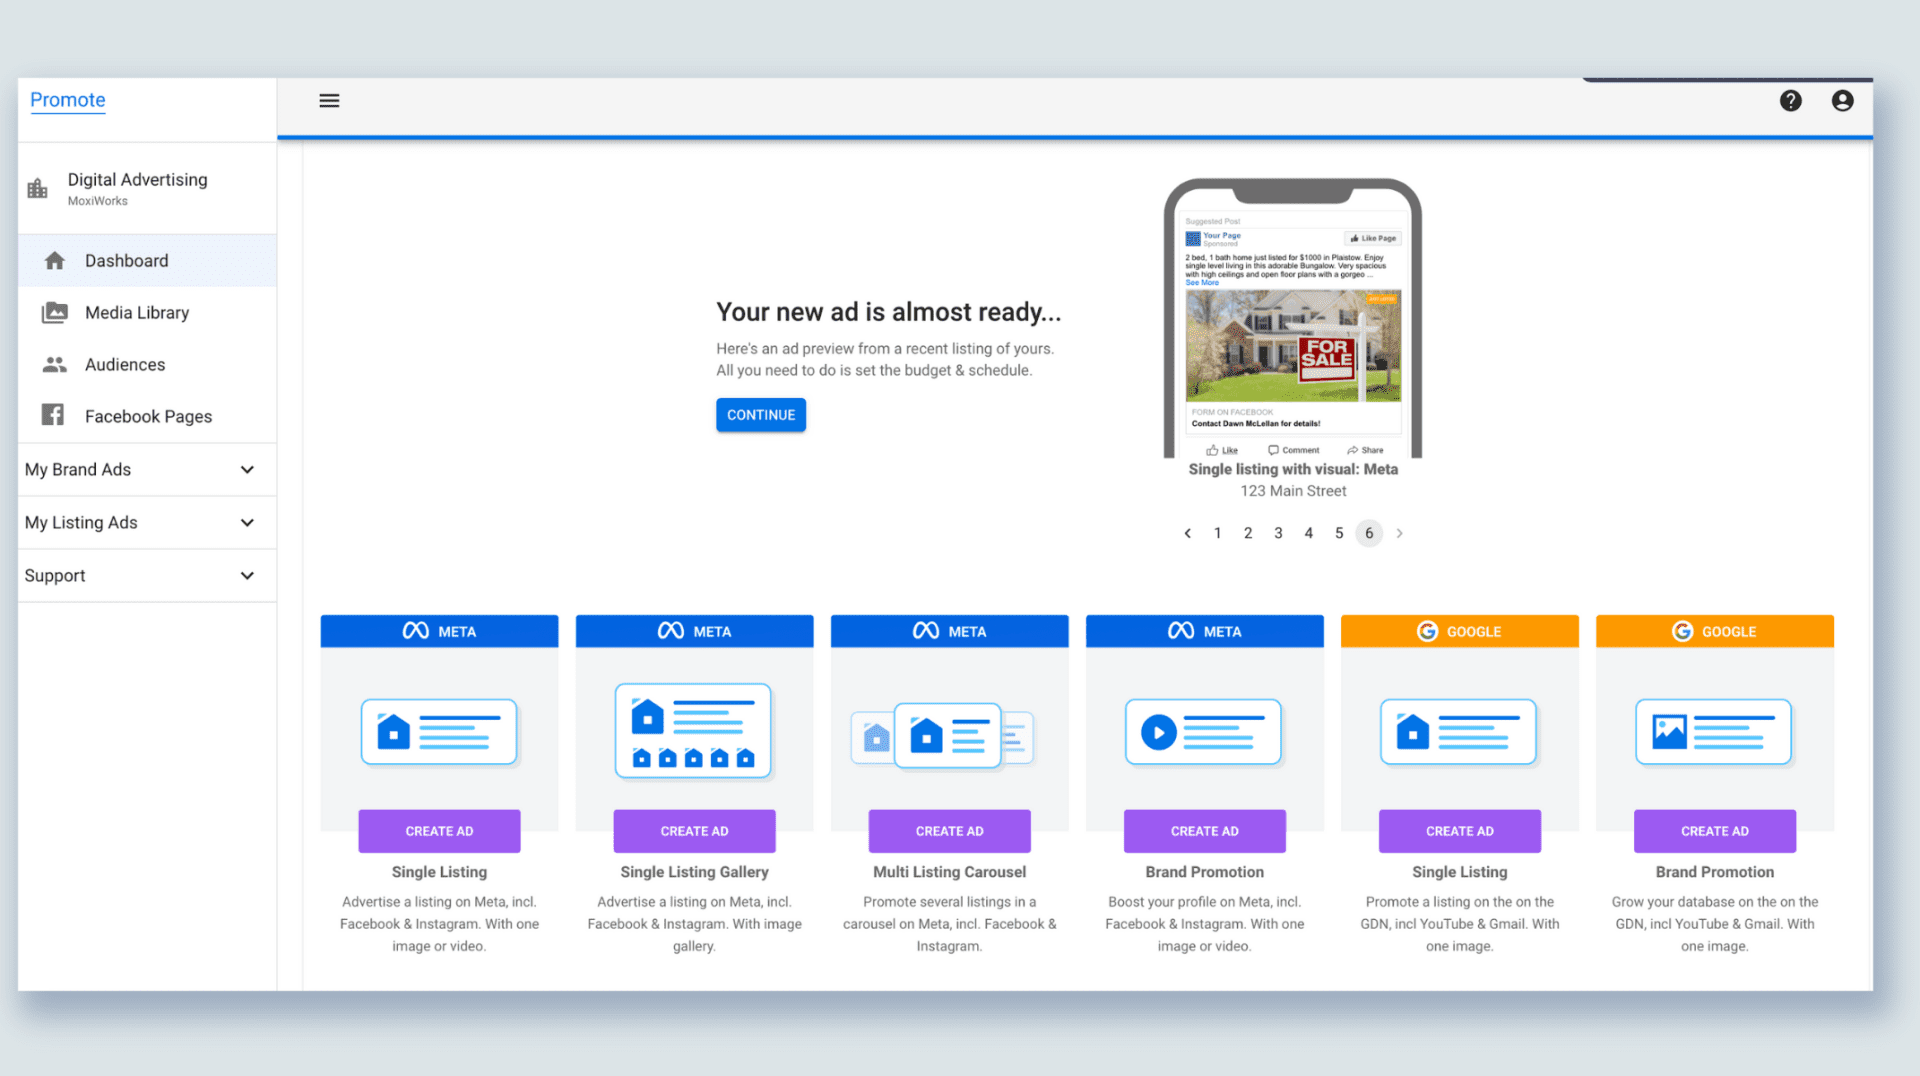 Display of the MoxiPromote home dashboard showing new blueprint types for real estate ads